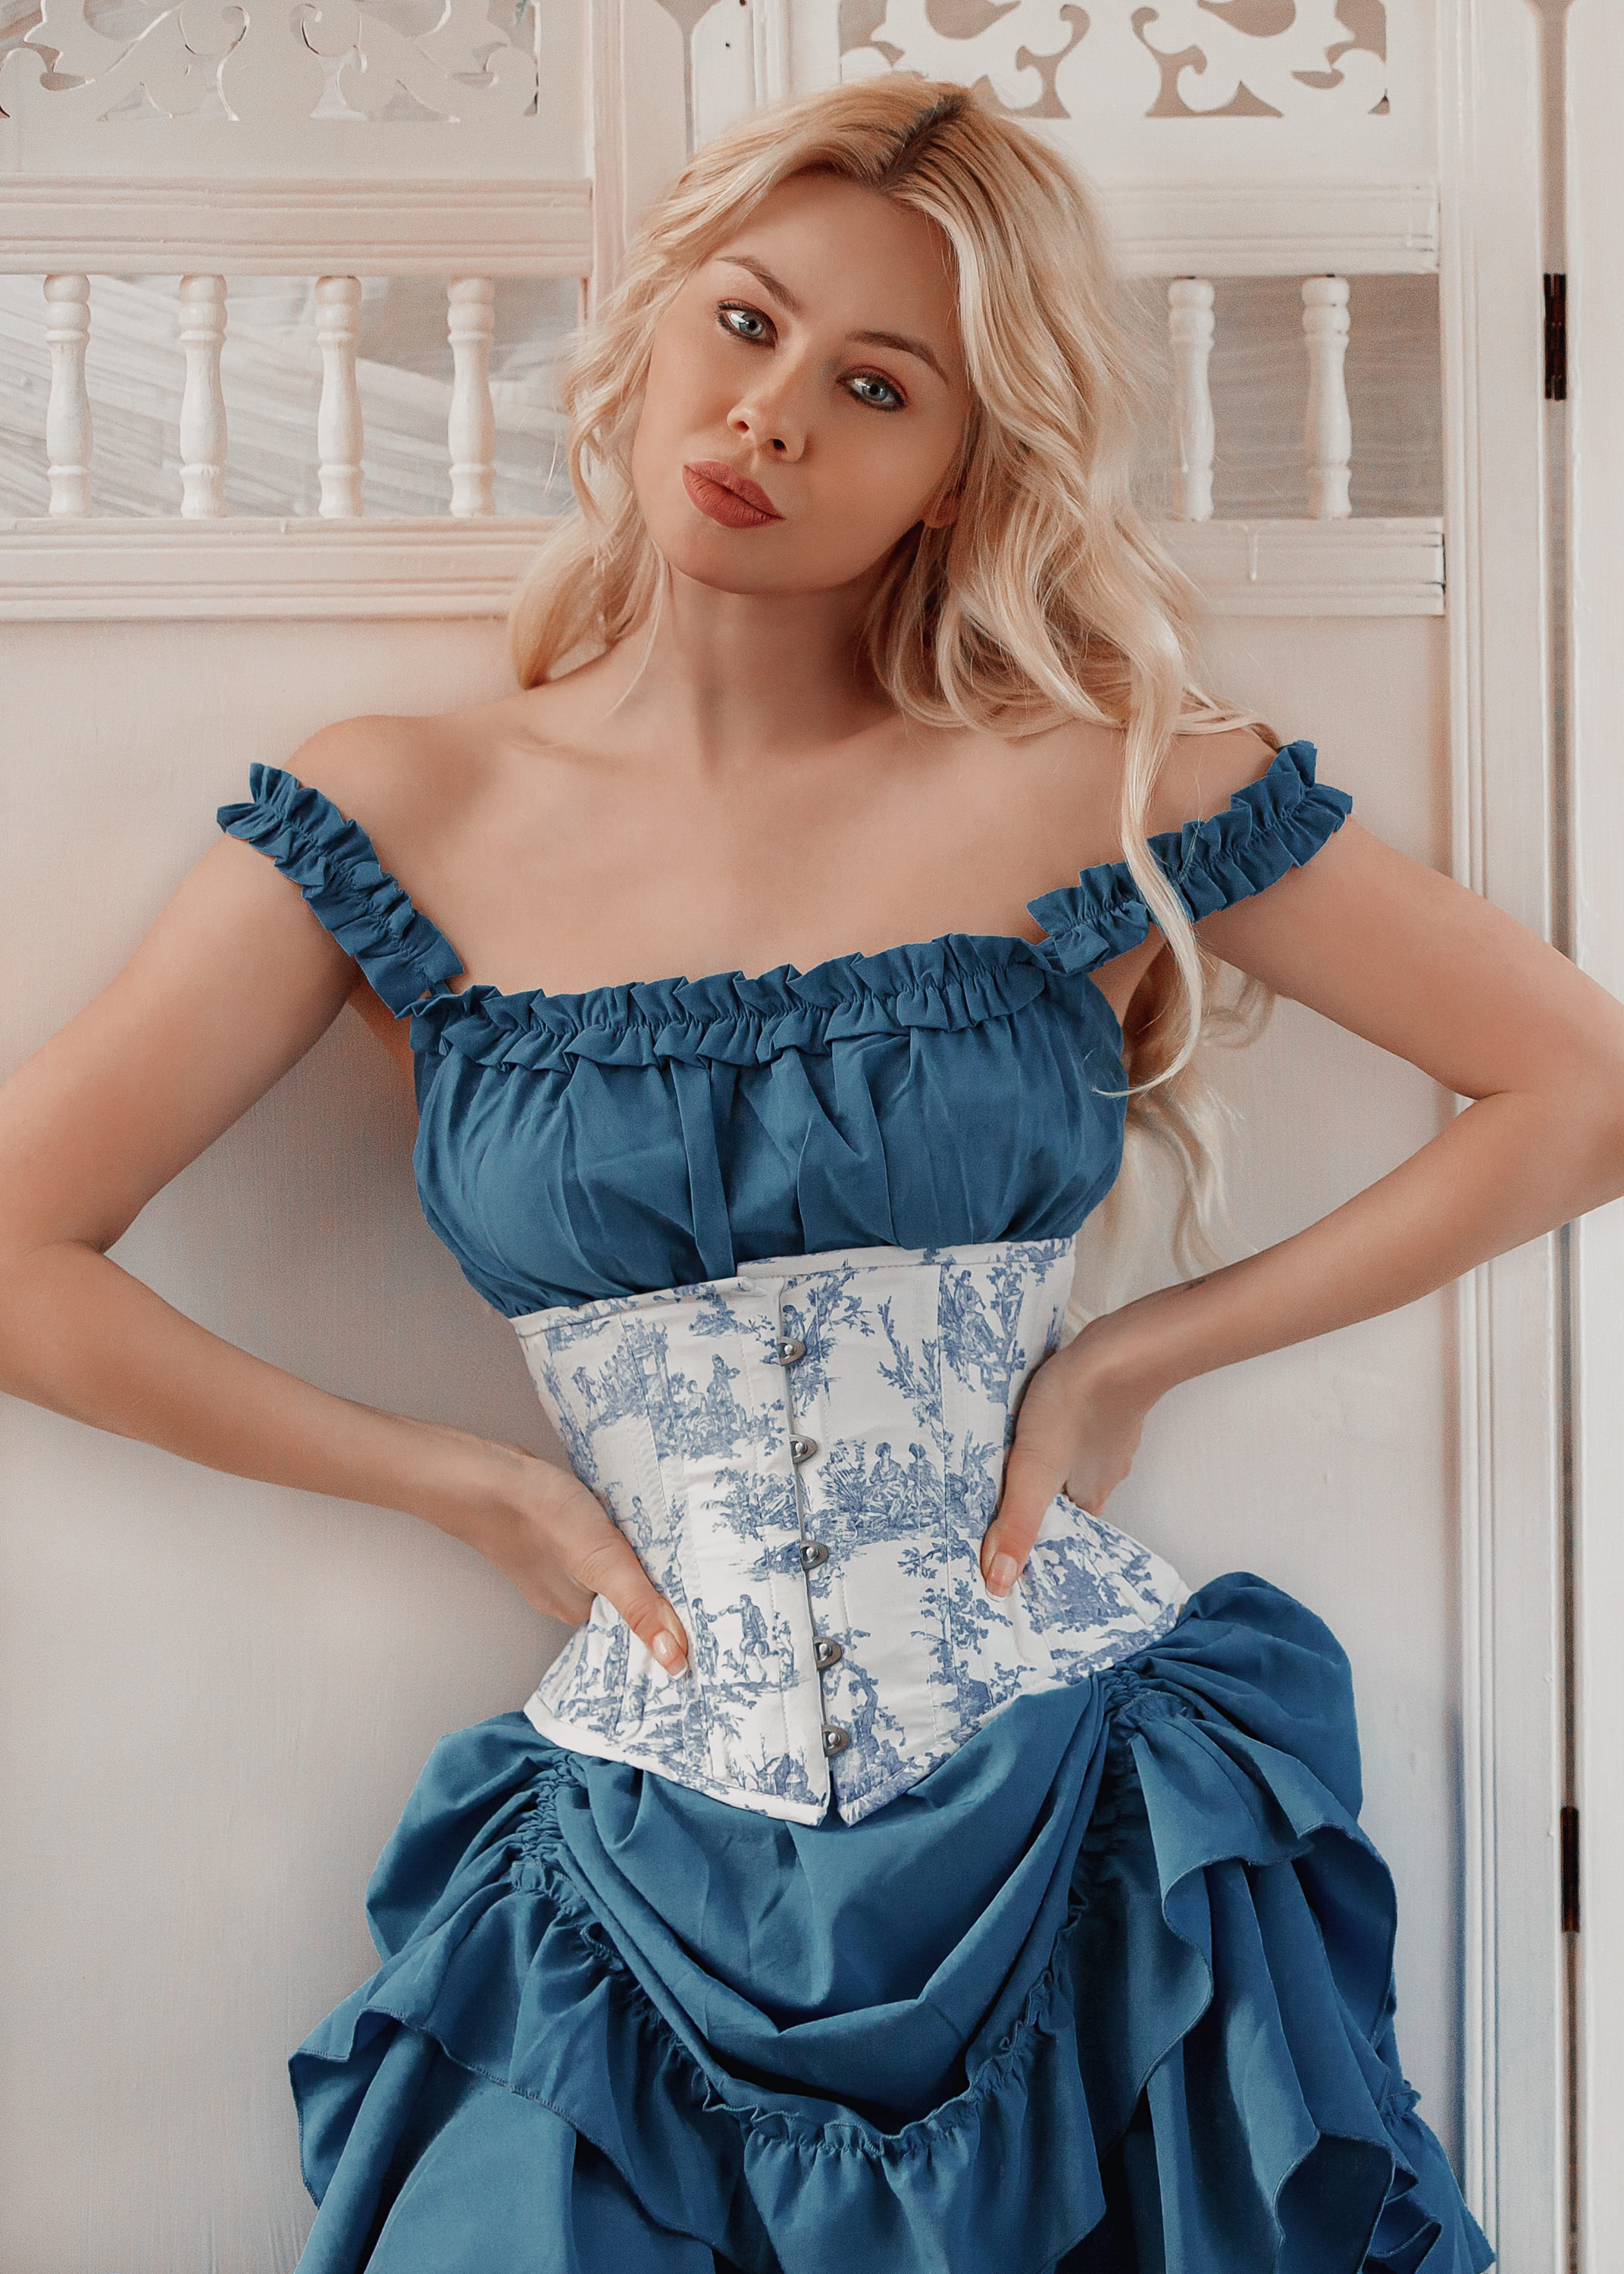 The Underbust Corset in Themed Events